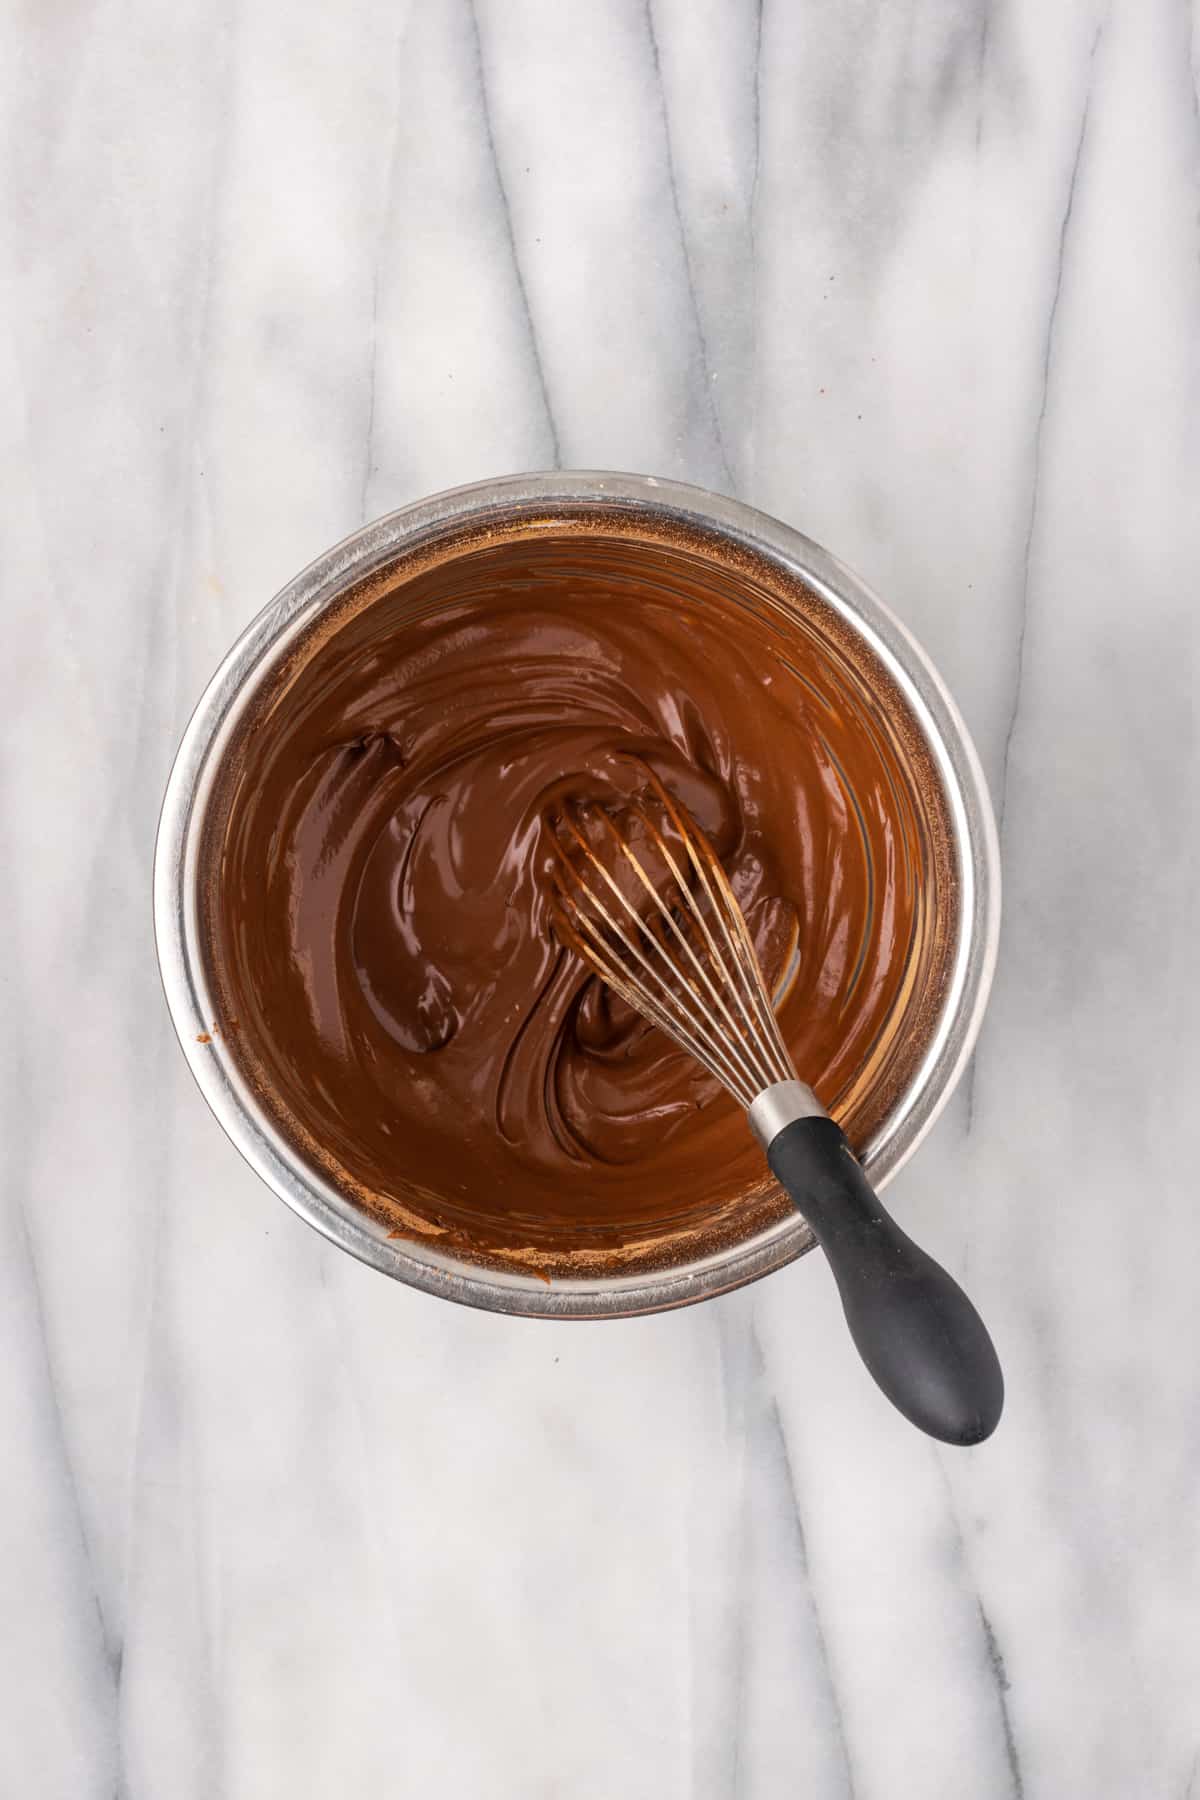 Chocolate sauce mixed in a metal bowl.